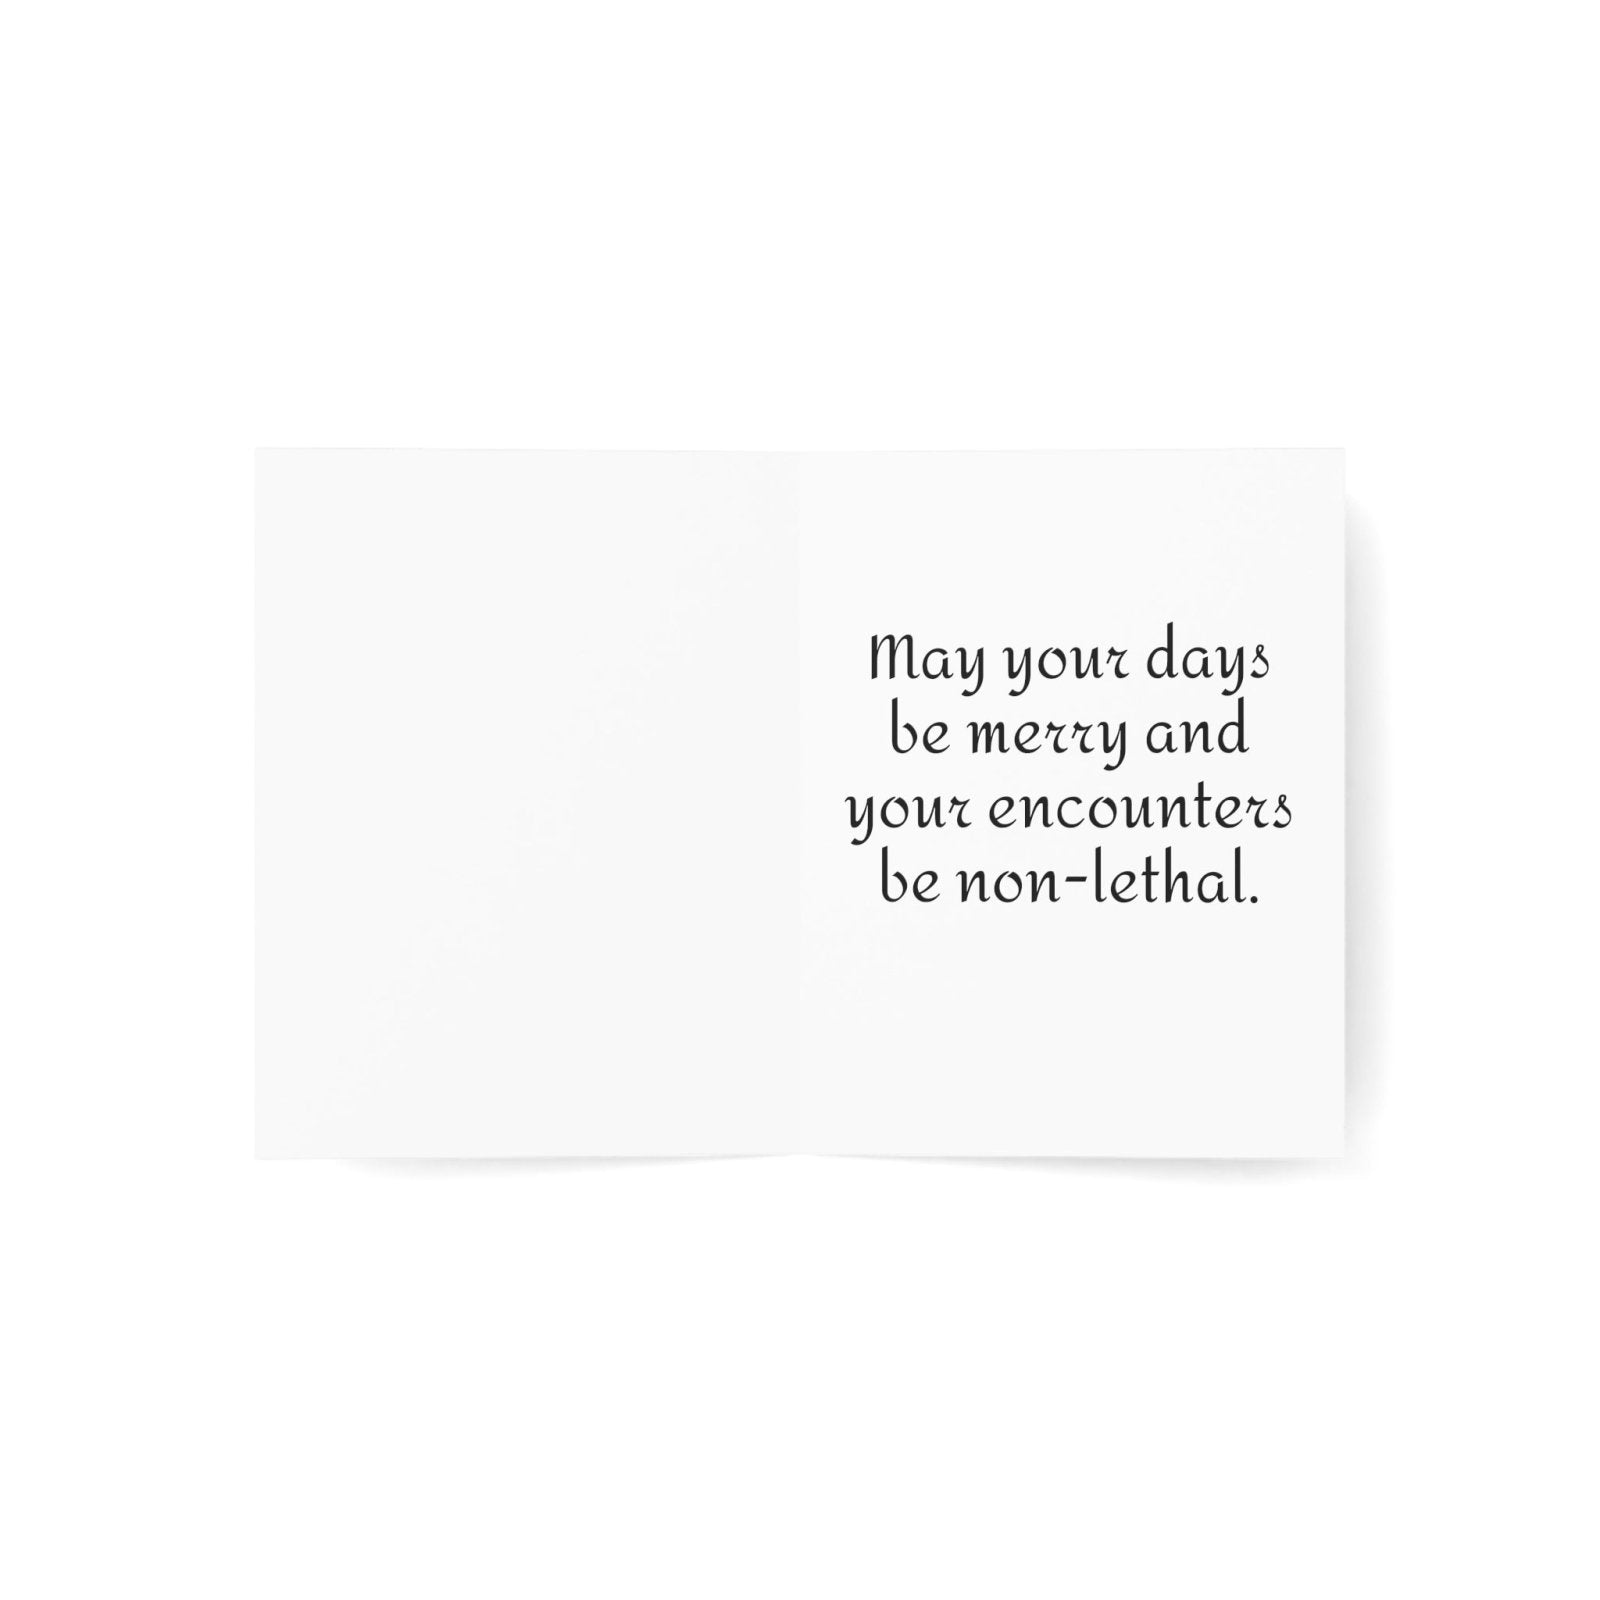 Merry Encounters DnD Christmas Critsmas Greeting Cards - Subtle Blue M